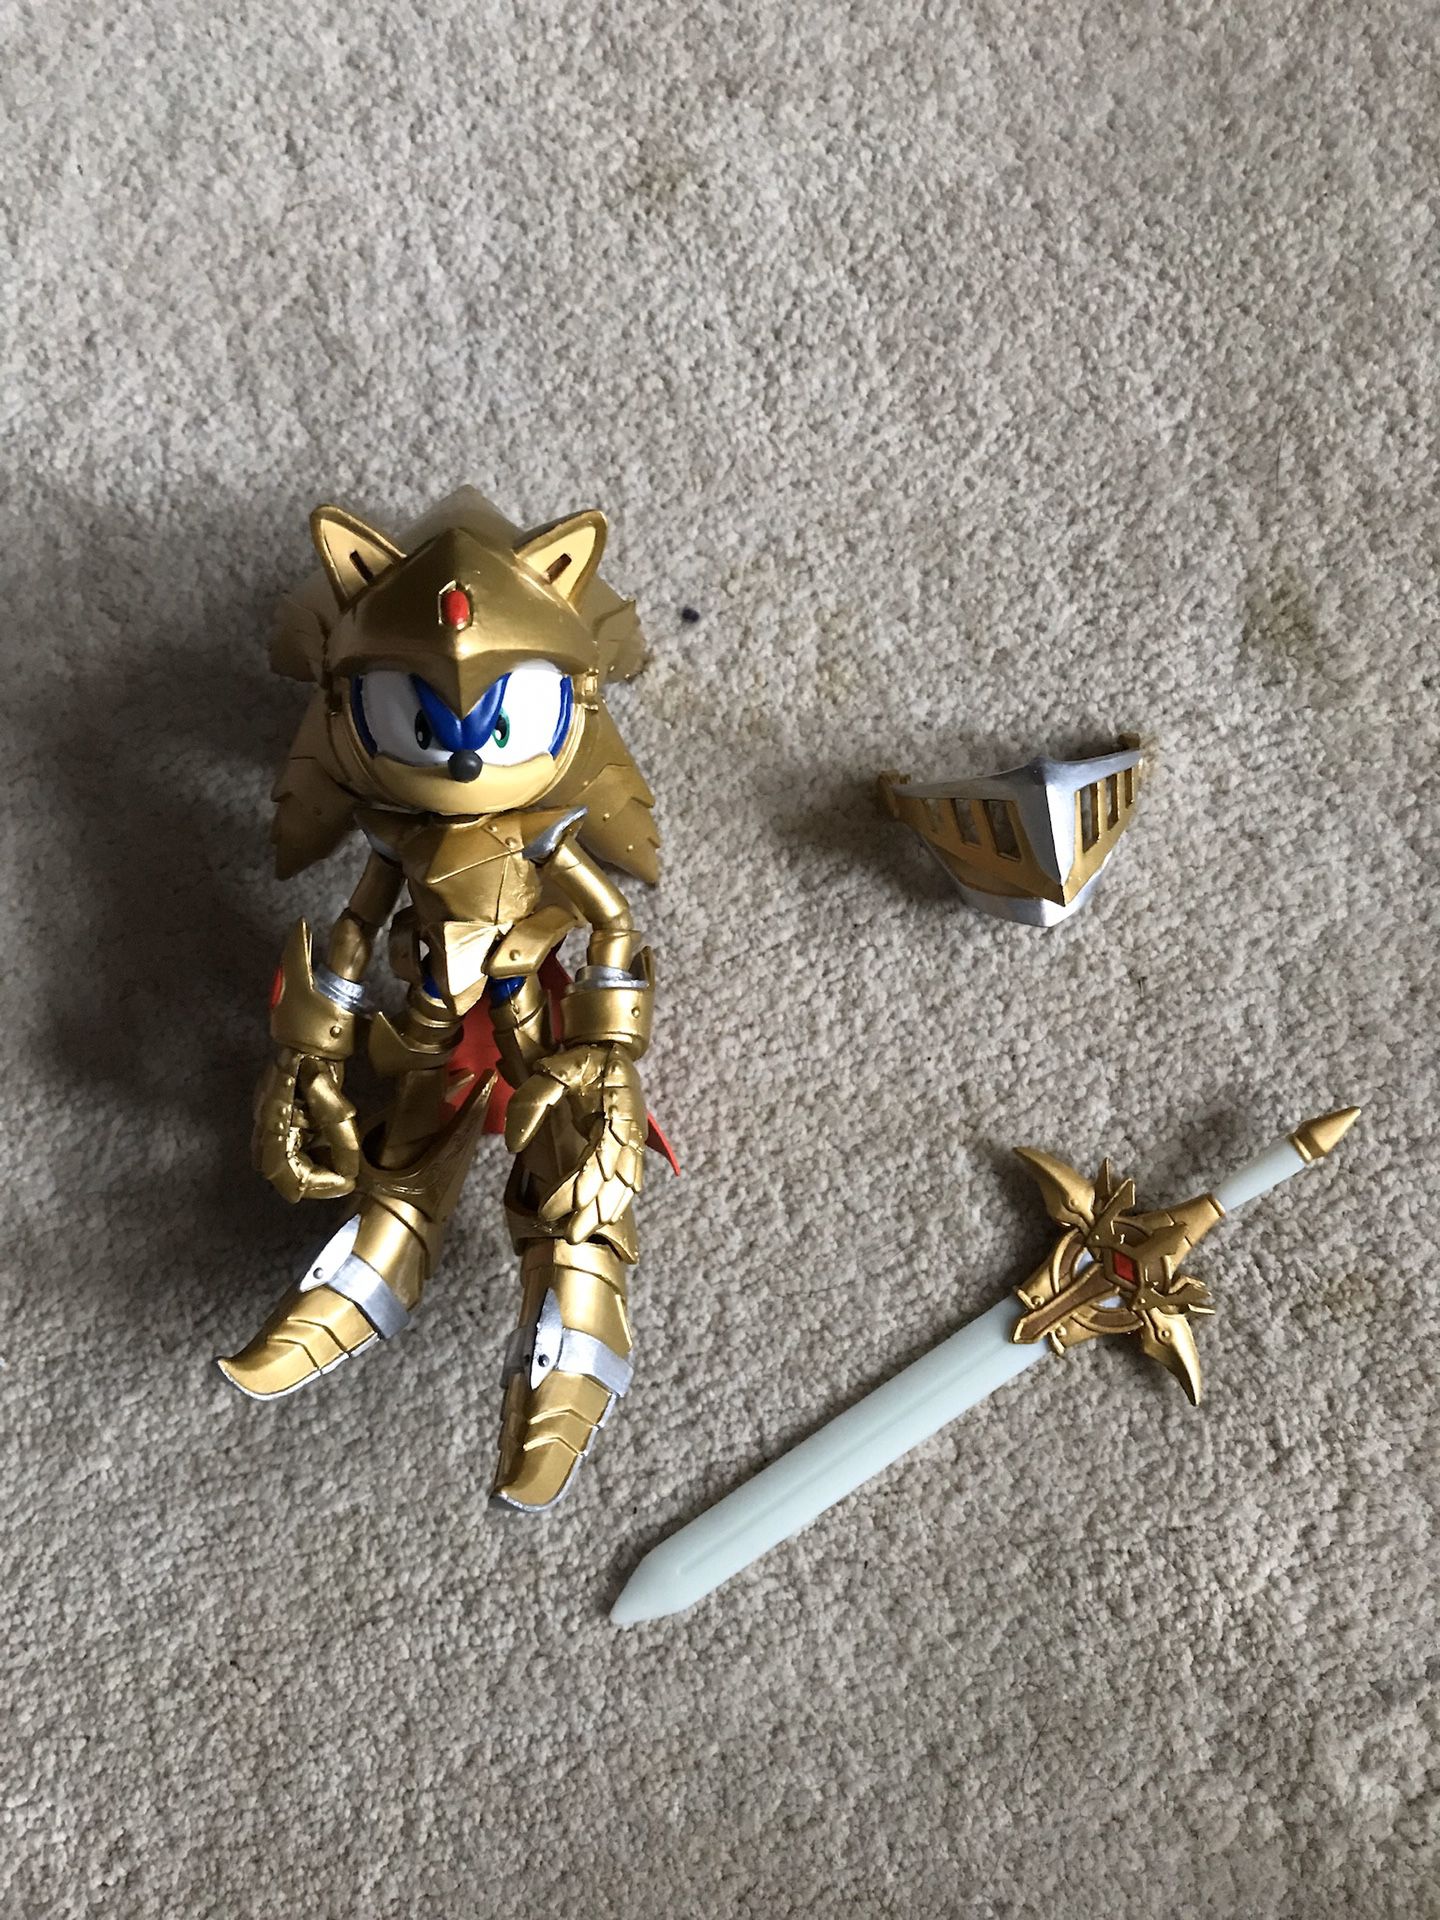 Sonic gold knight action figure